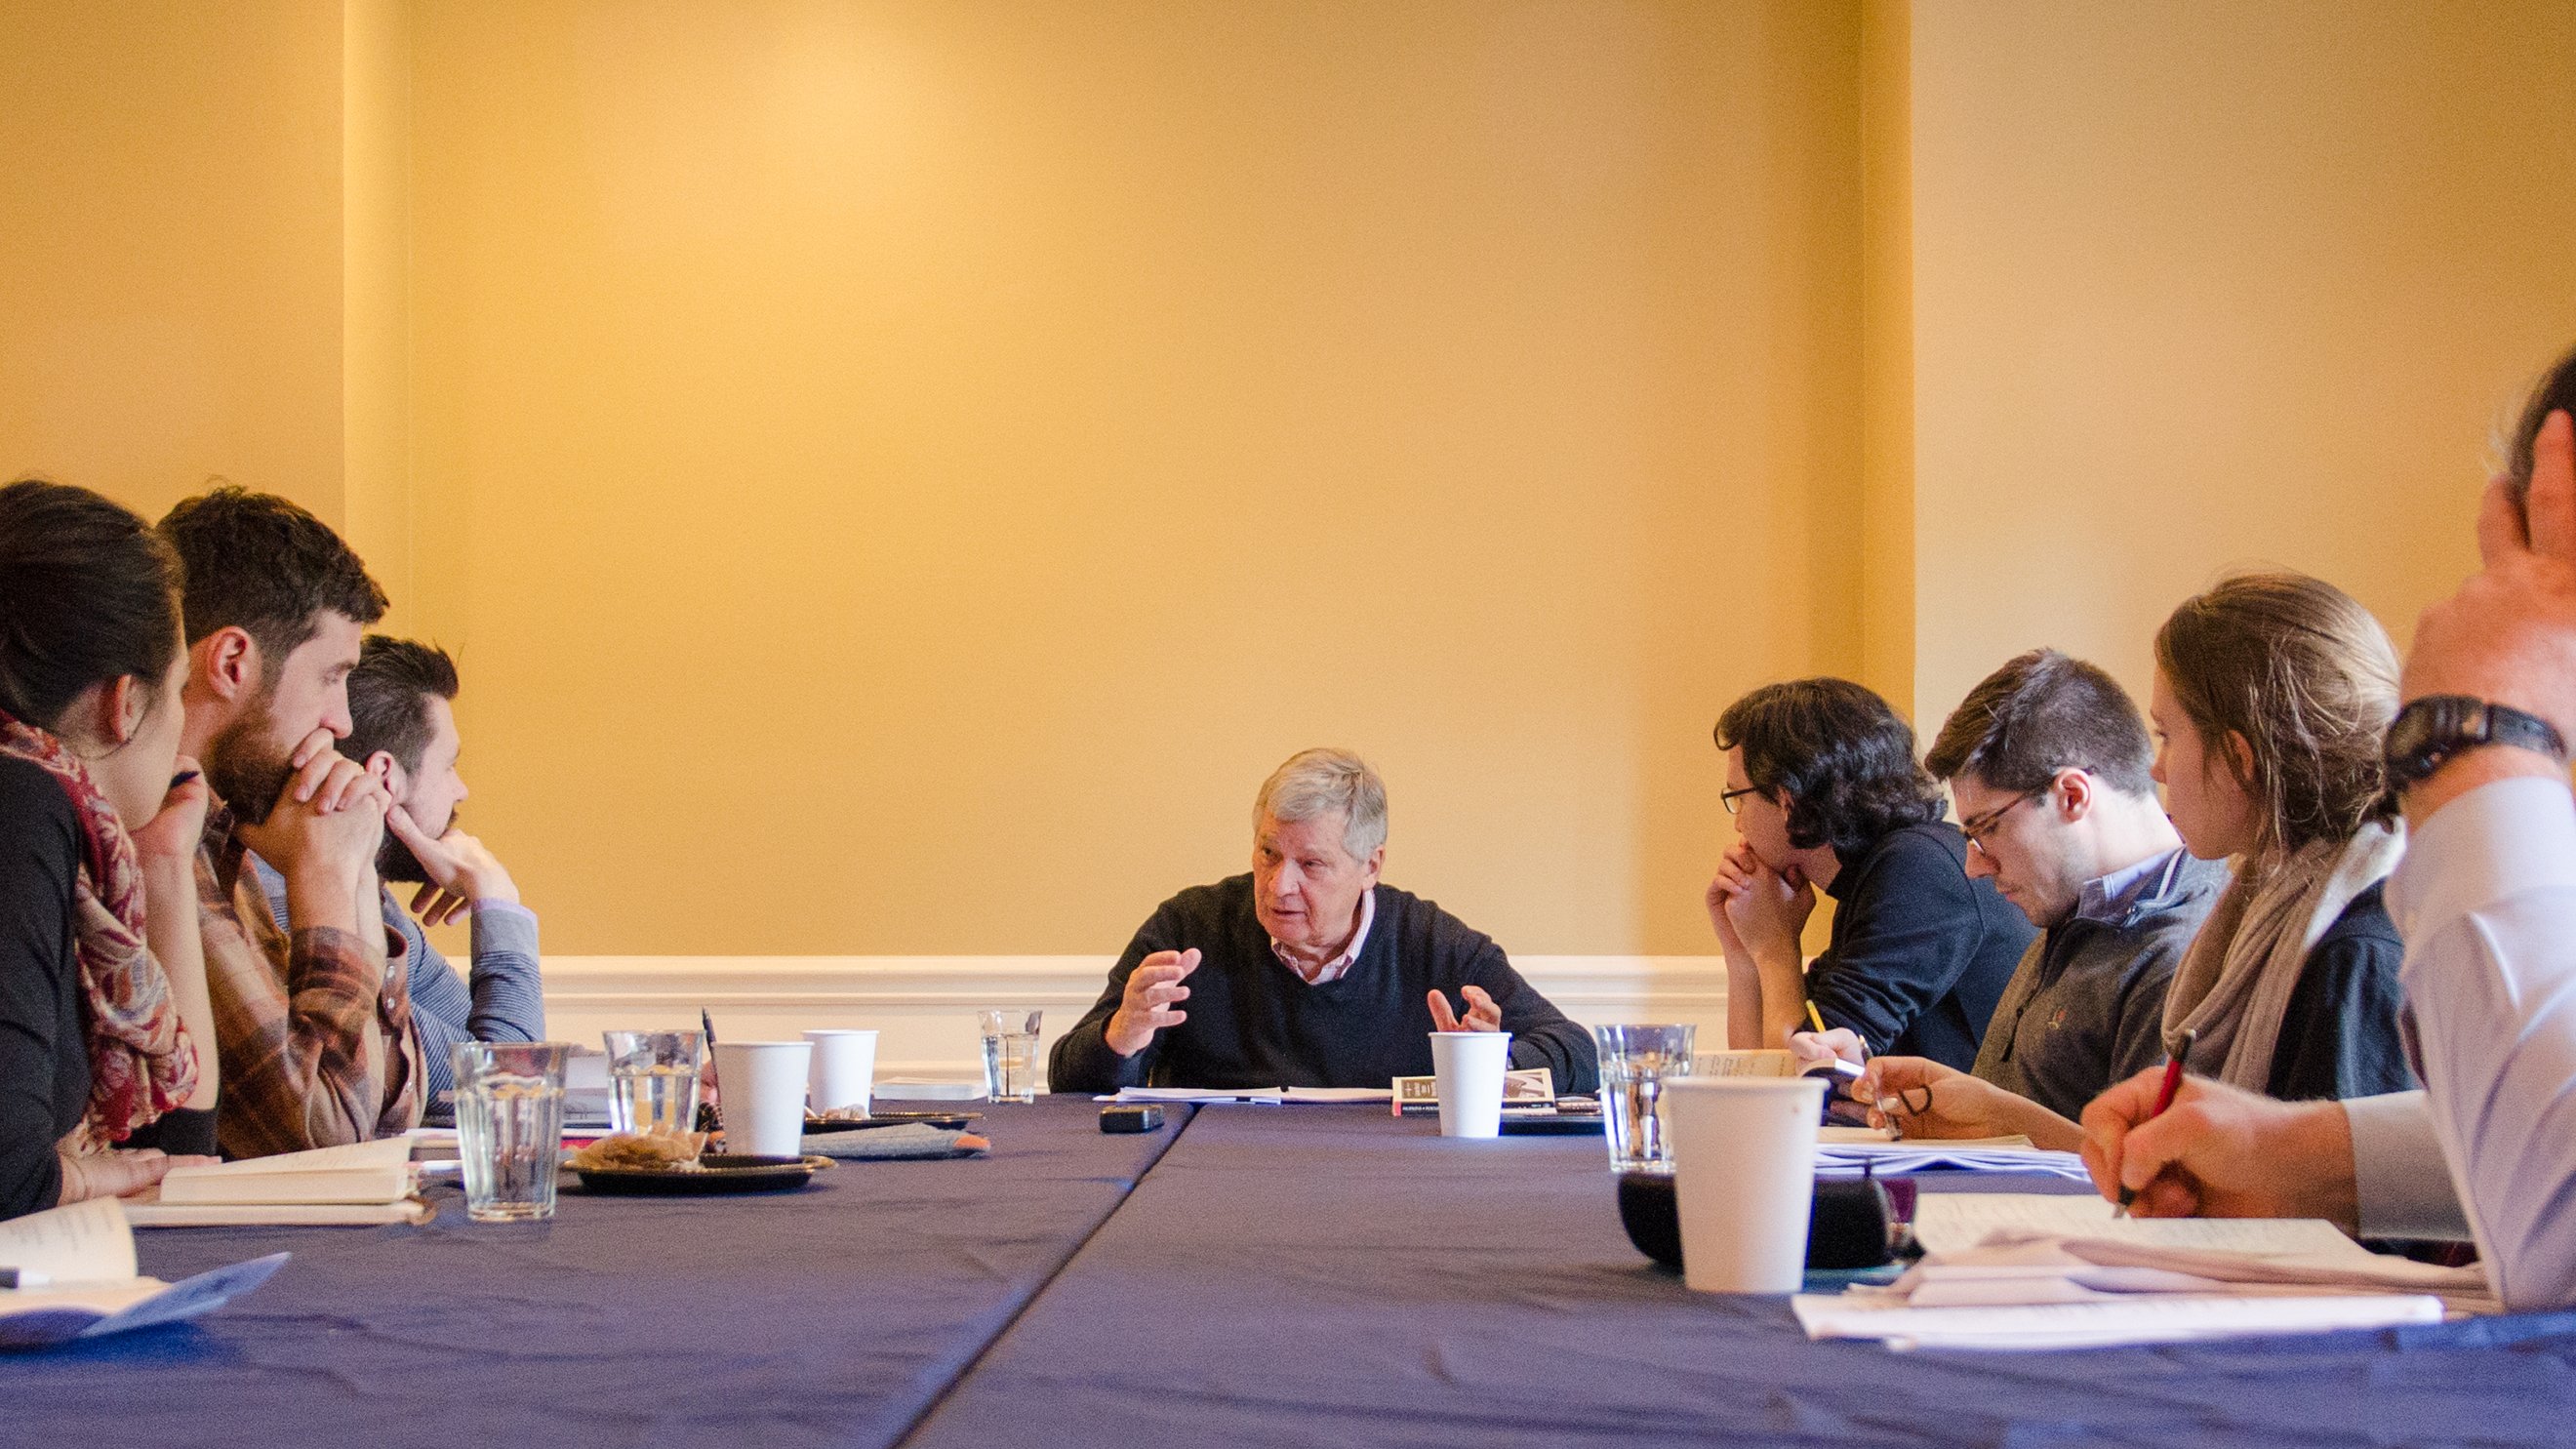 Paul Mariani, a Catholic poet at Boston College gives a master class to graduate students at the Lumen Christi Institute at the University of Chicago. (CNS photo/Mark Franzen, Lumen Christi Institute)